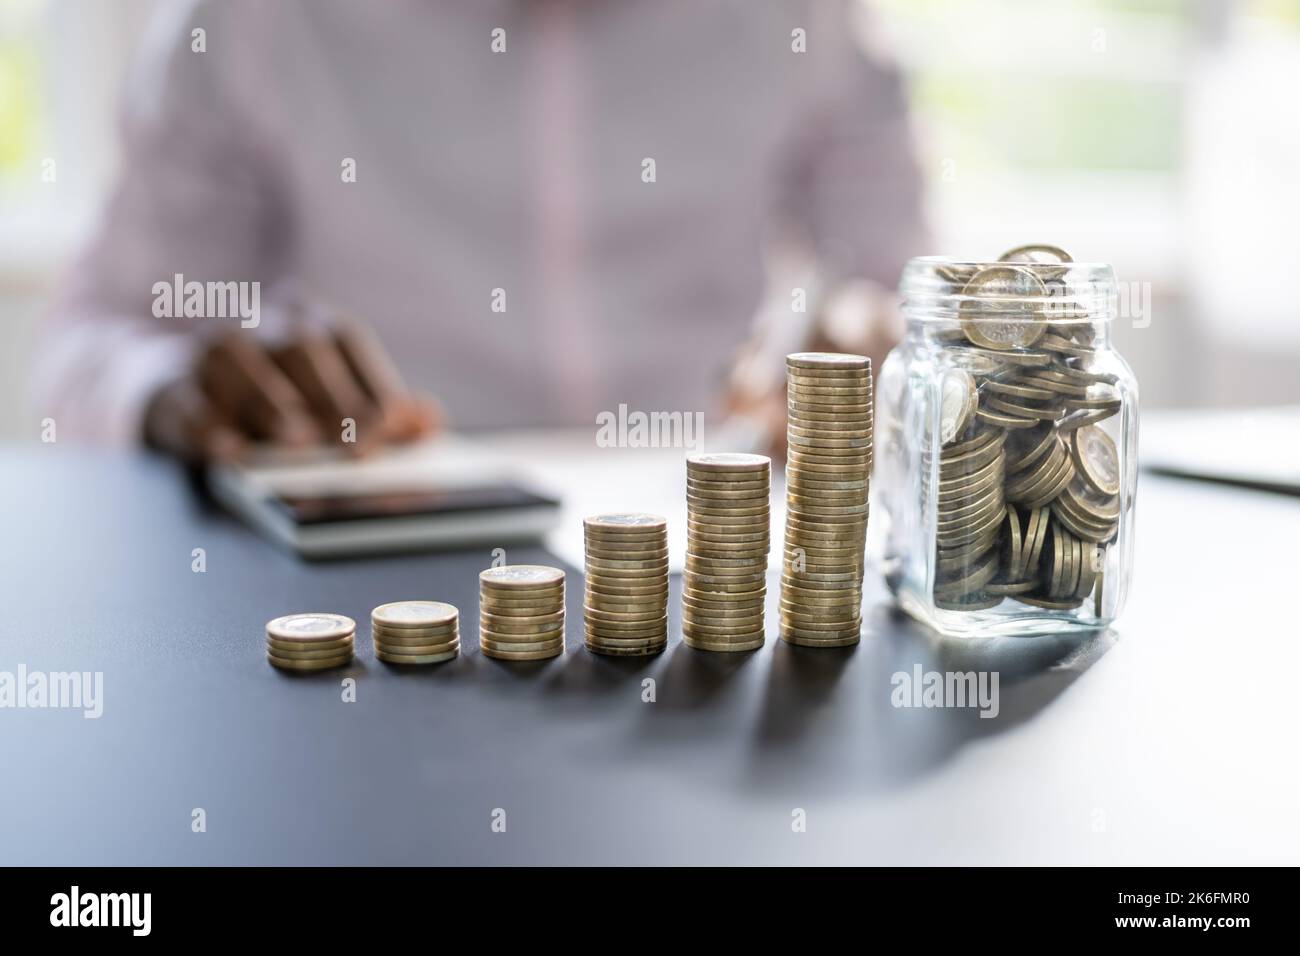 Pension Fund Jar. Coins And Inflation. Money Deposit Stock Photo